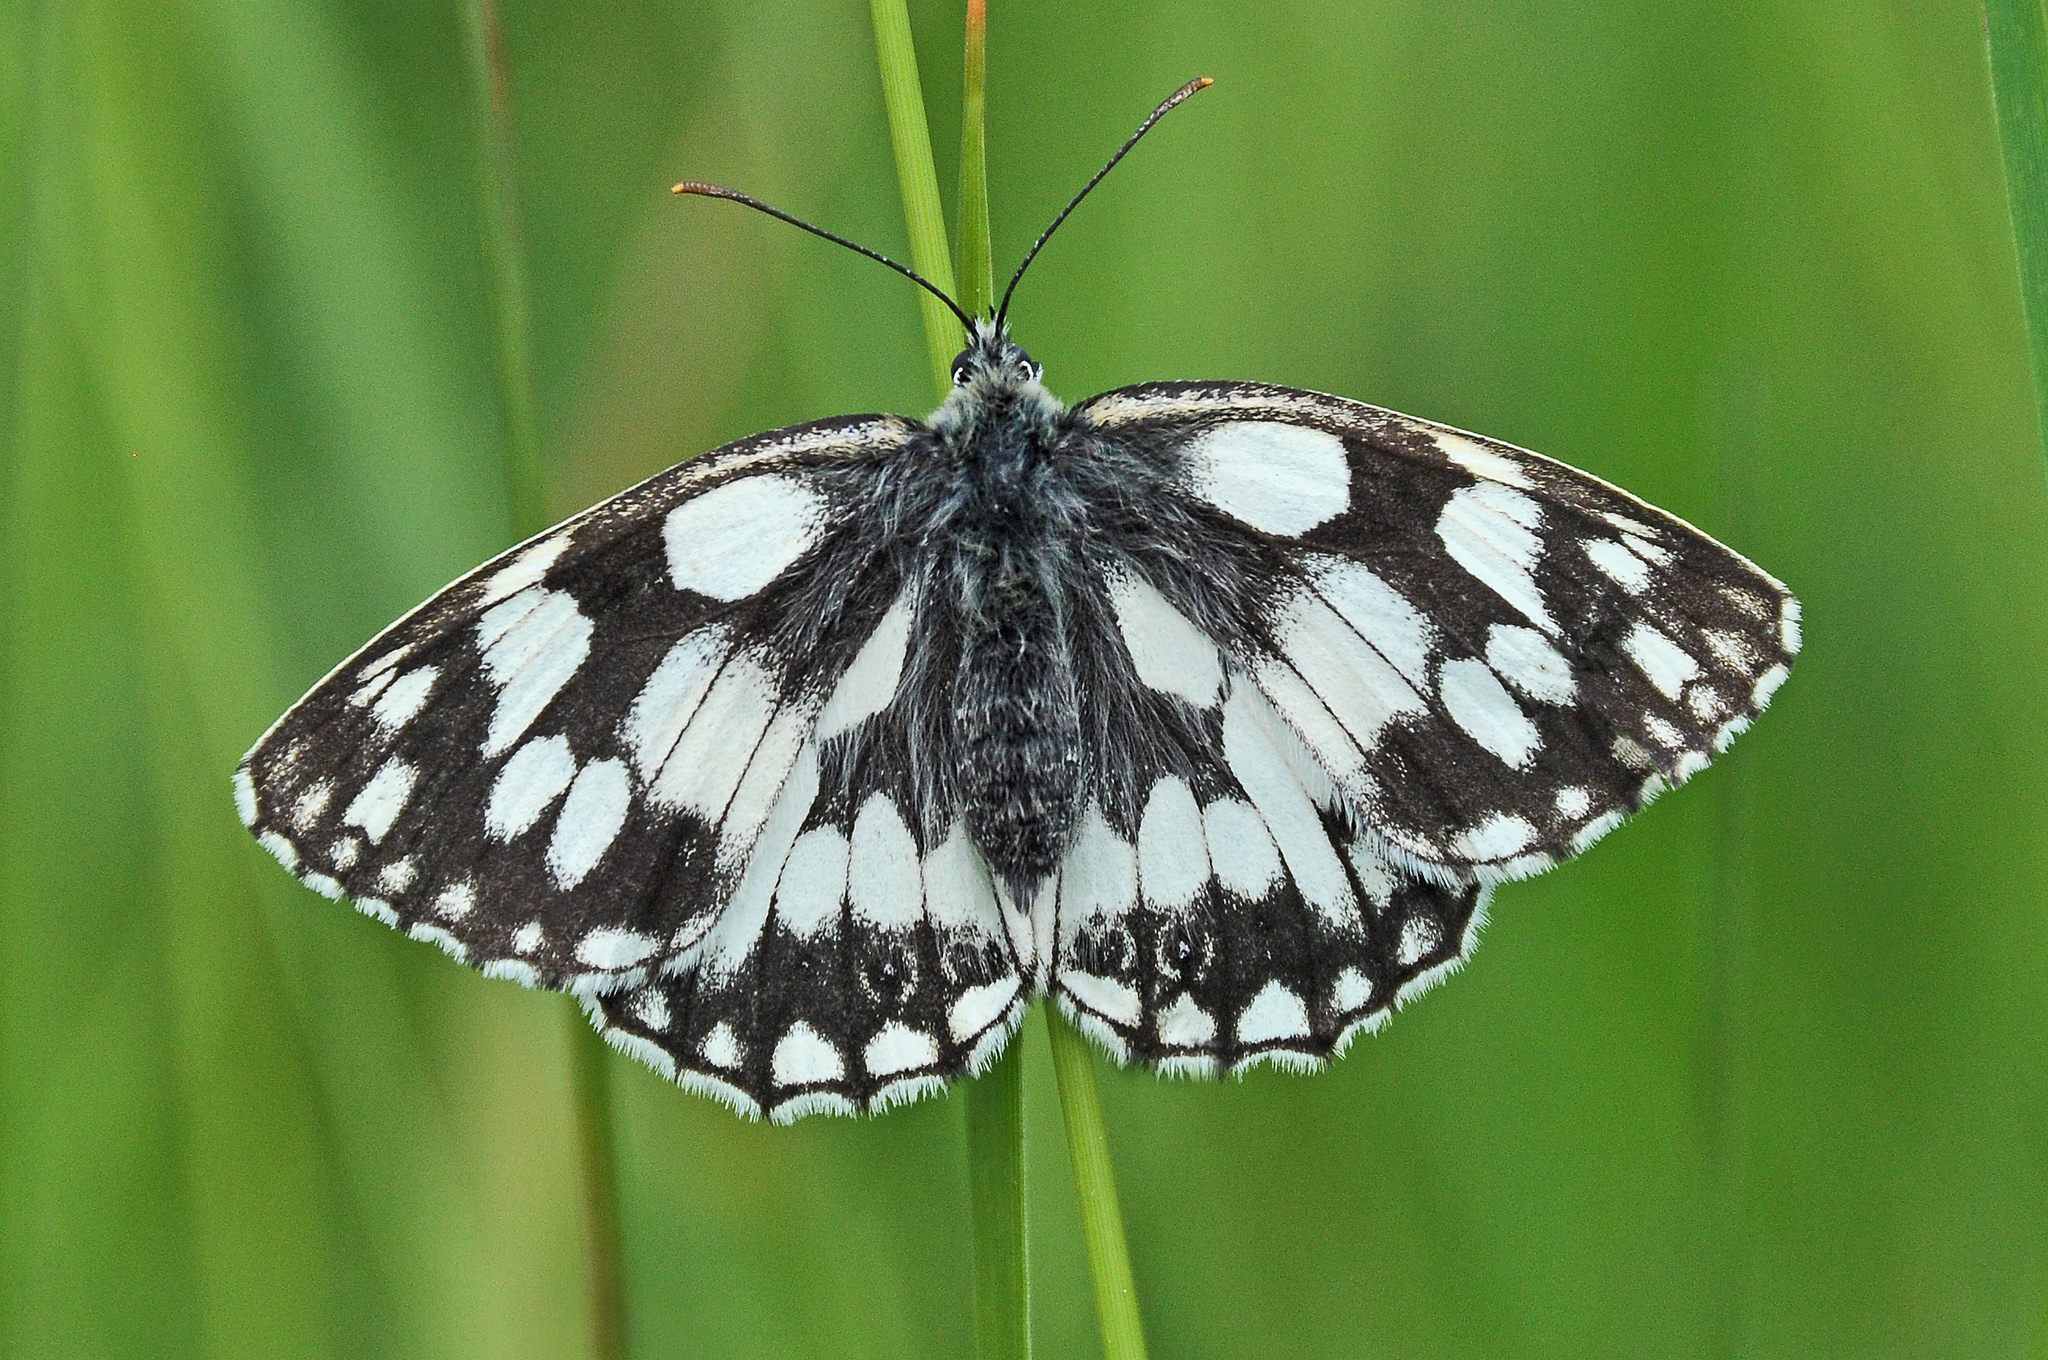 Image: The marbled white butterfly occurs in the south and north-east of England and has expanded its distribution in response to climate warming. Credit: Tim Melling/Butterfly Conservation